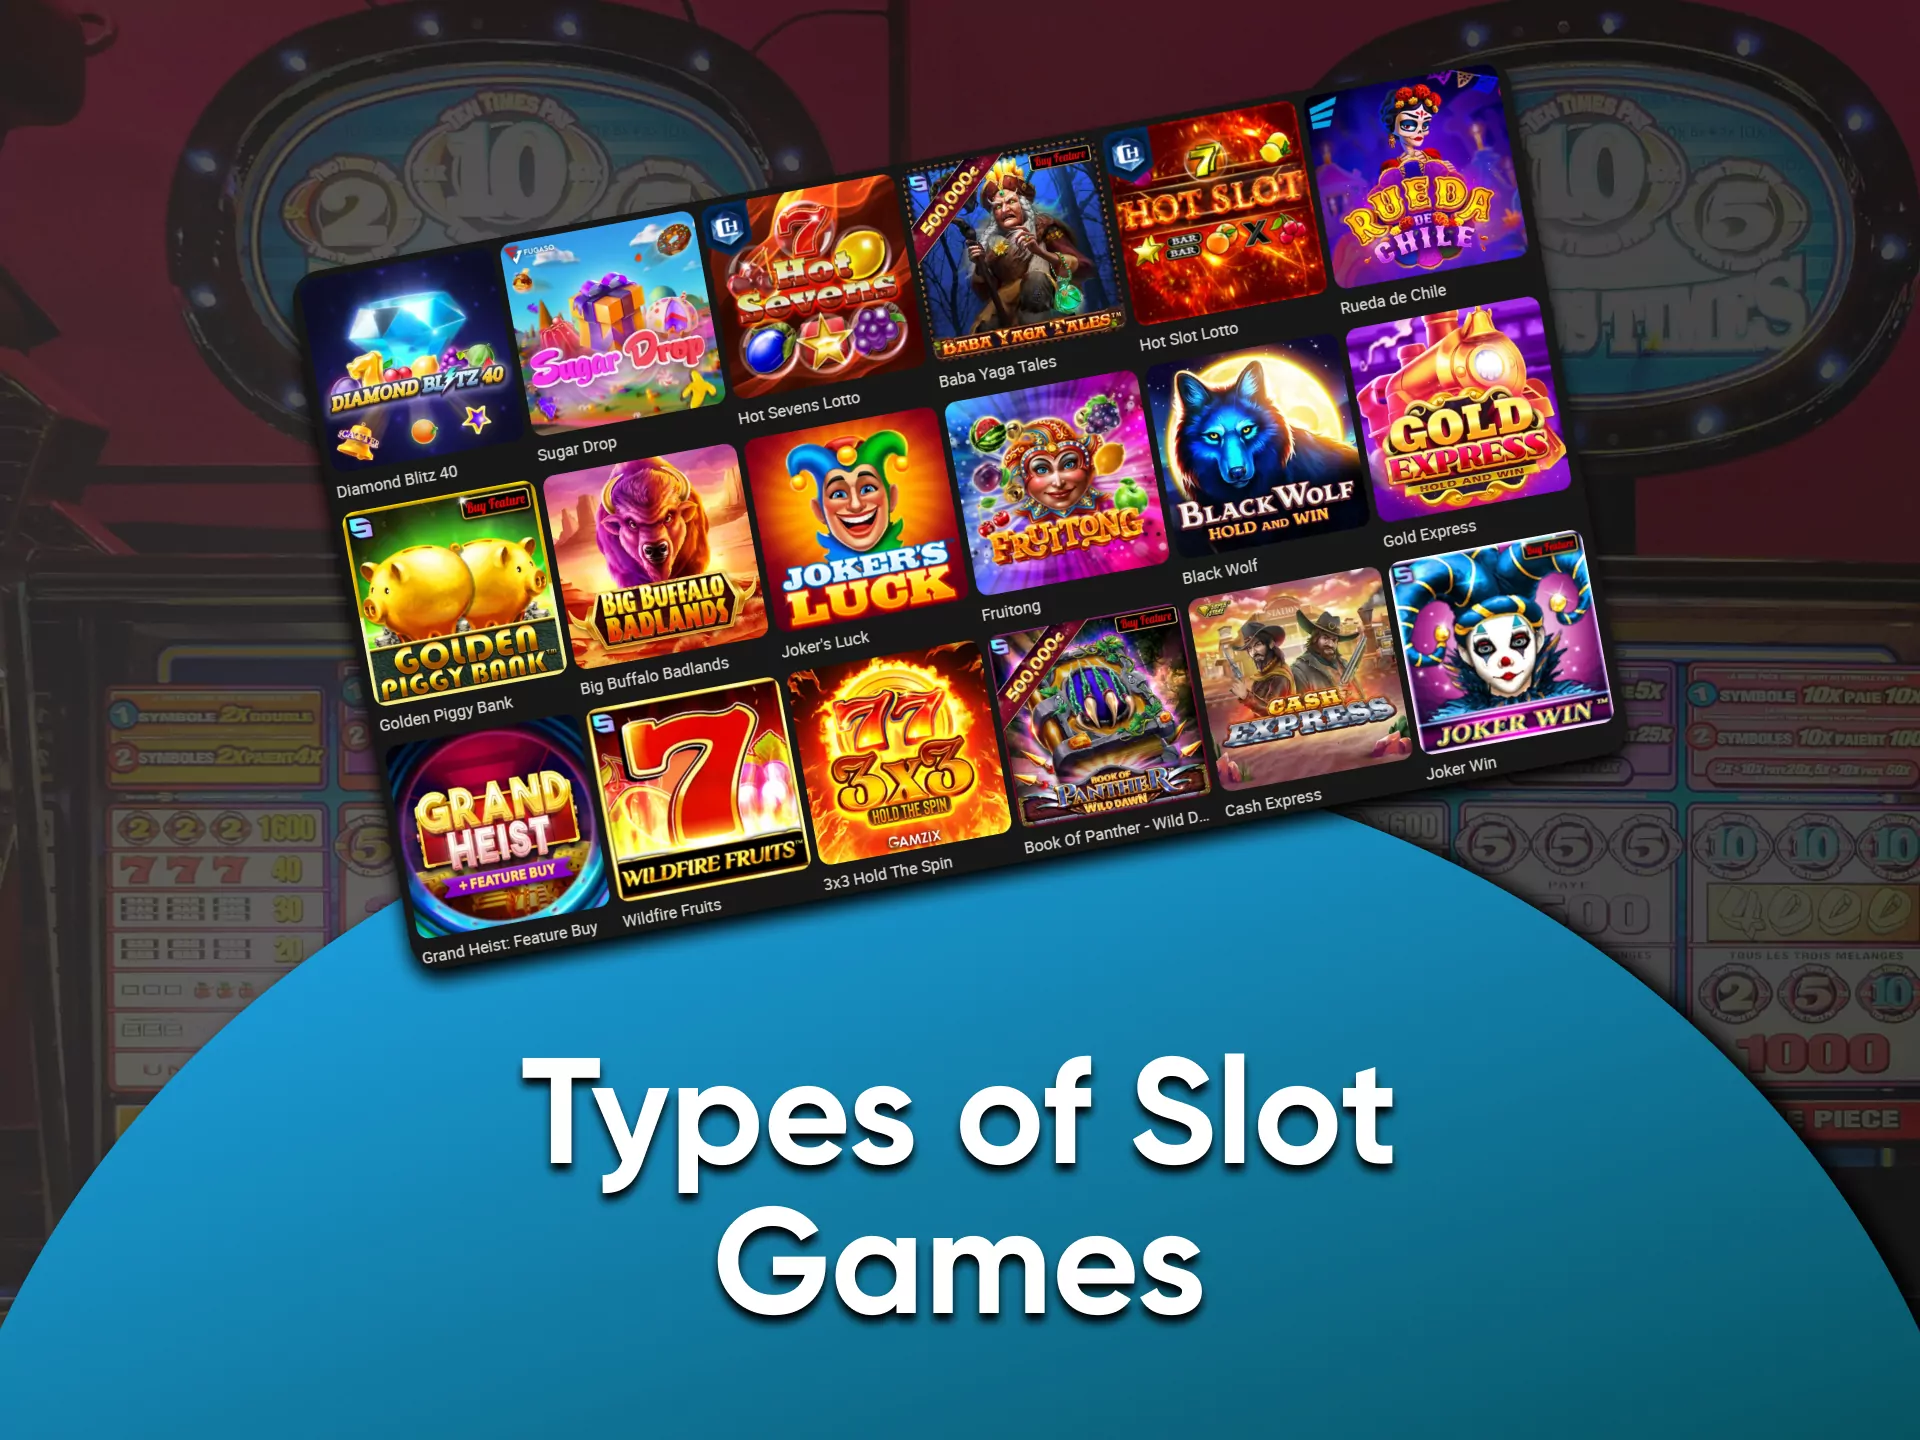 Play in your favorite slots online.